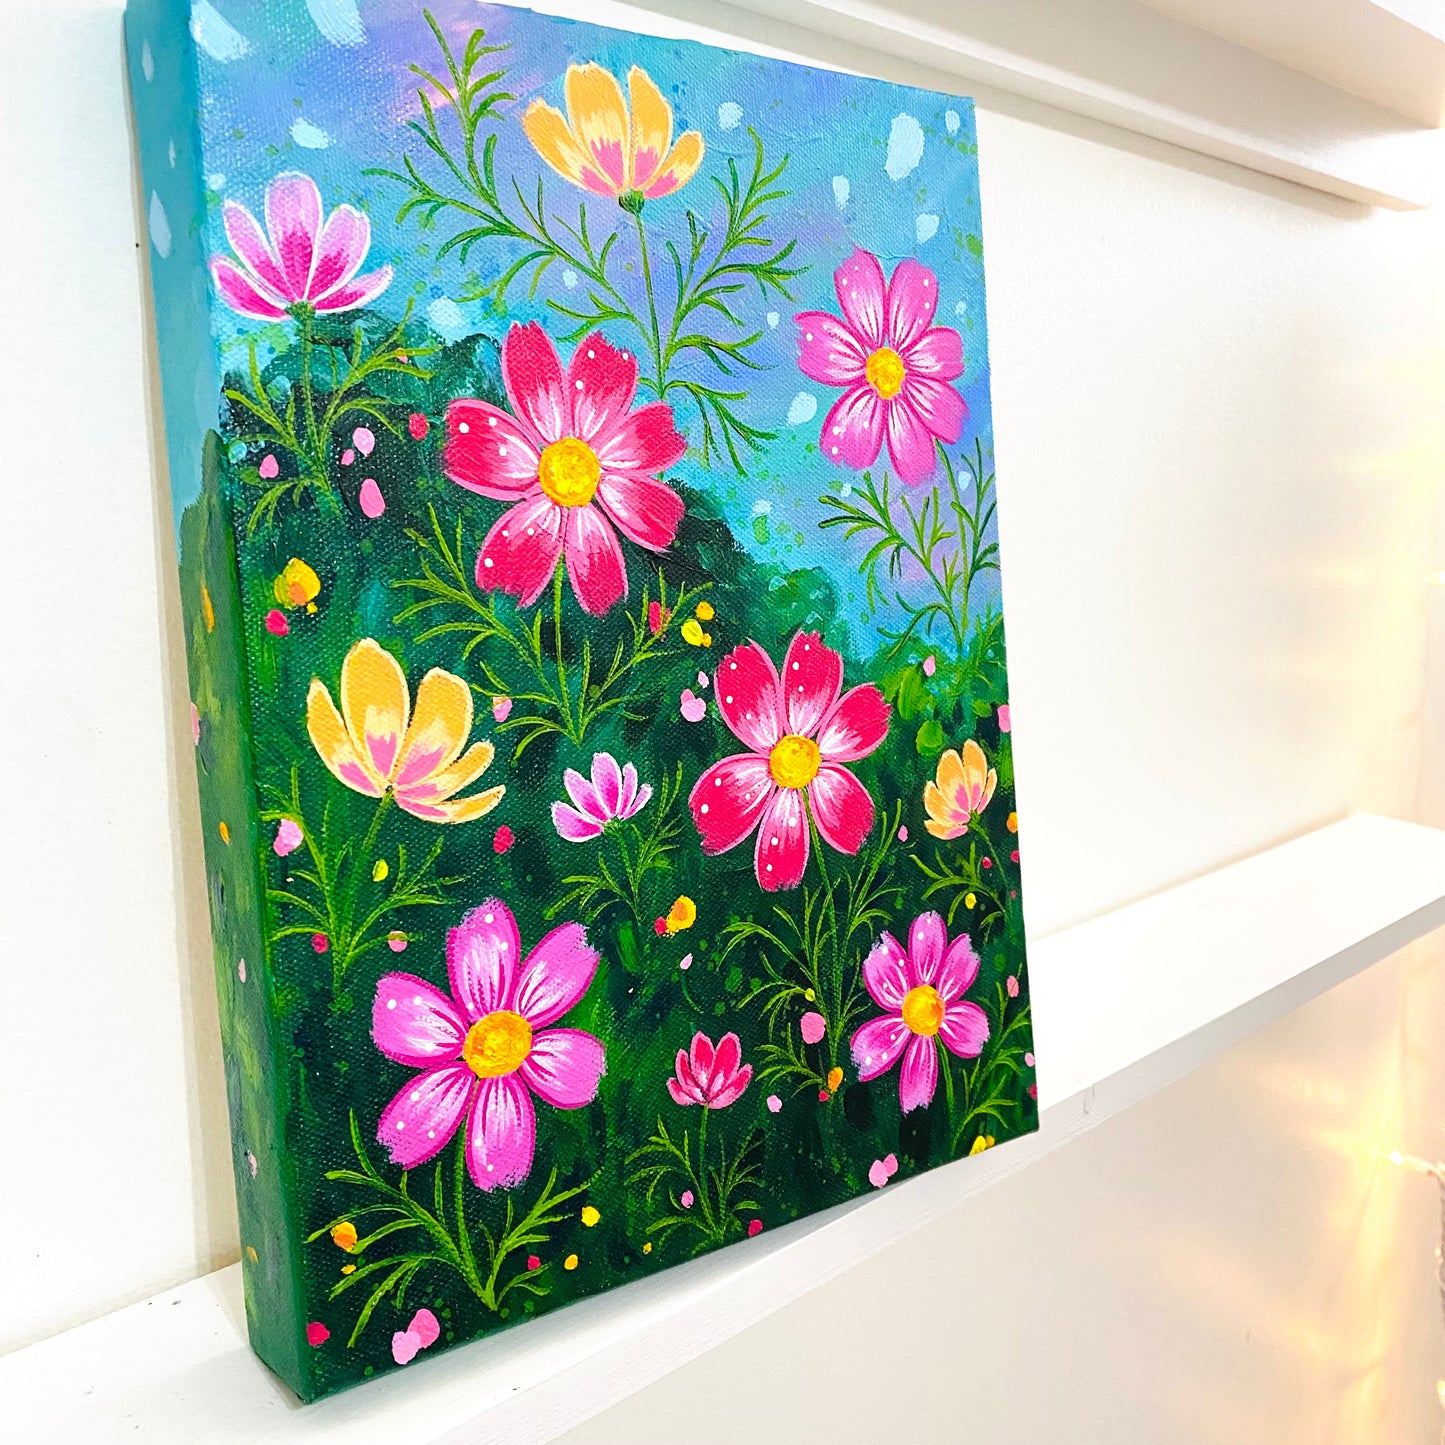 “Cosmo Fields” 9x12 inch original floral painting on canvas